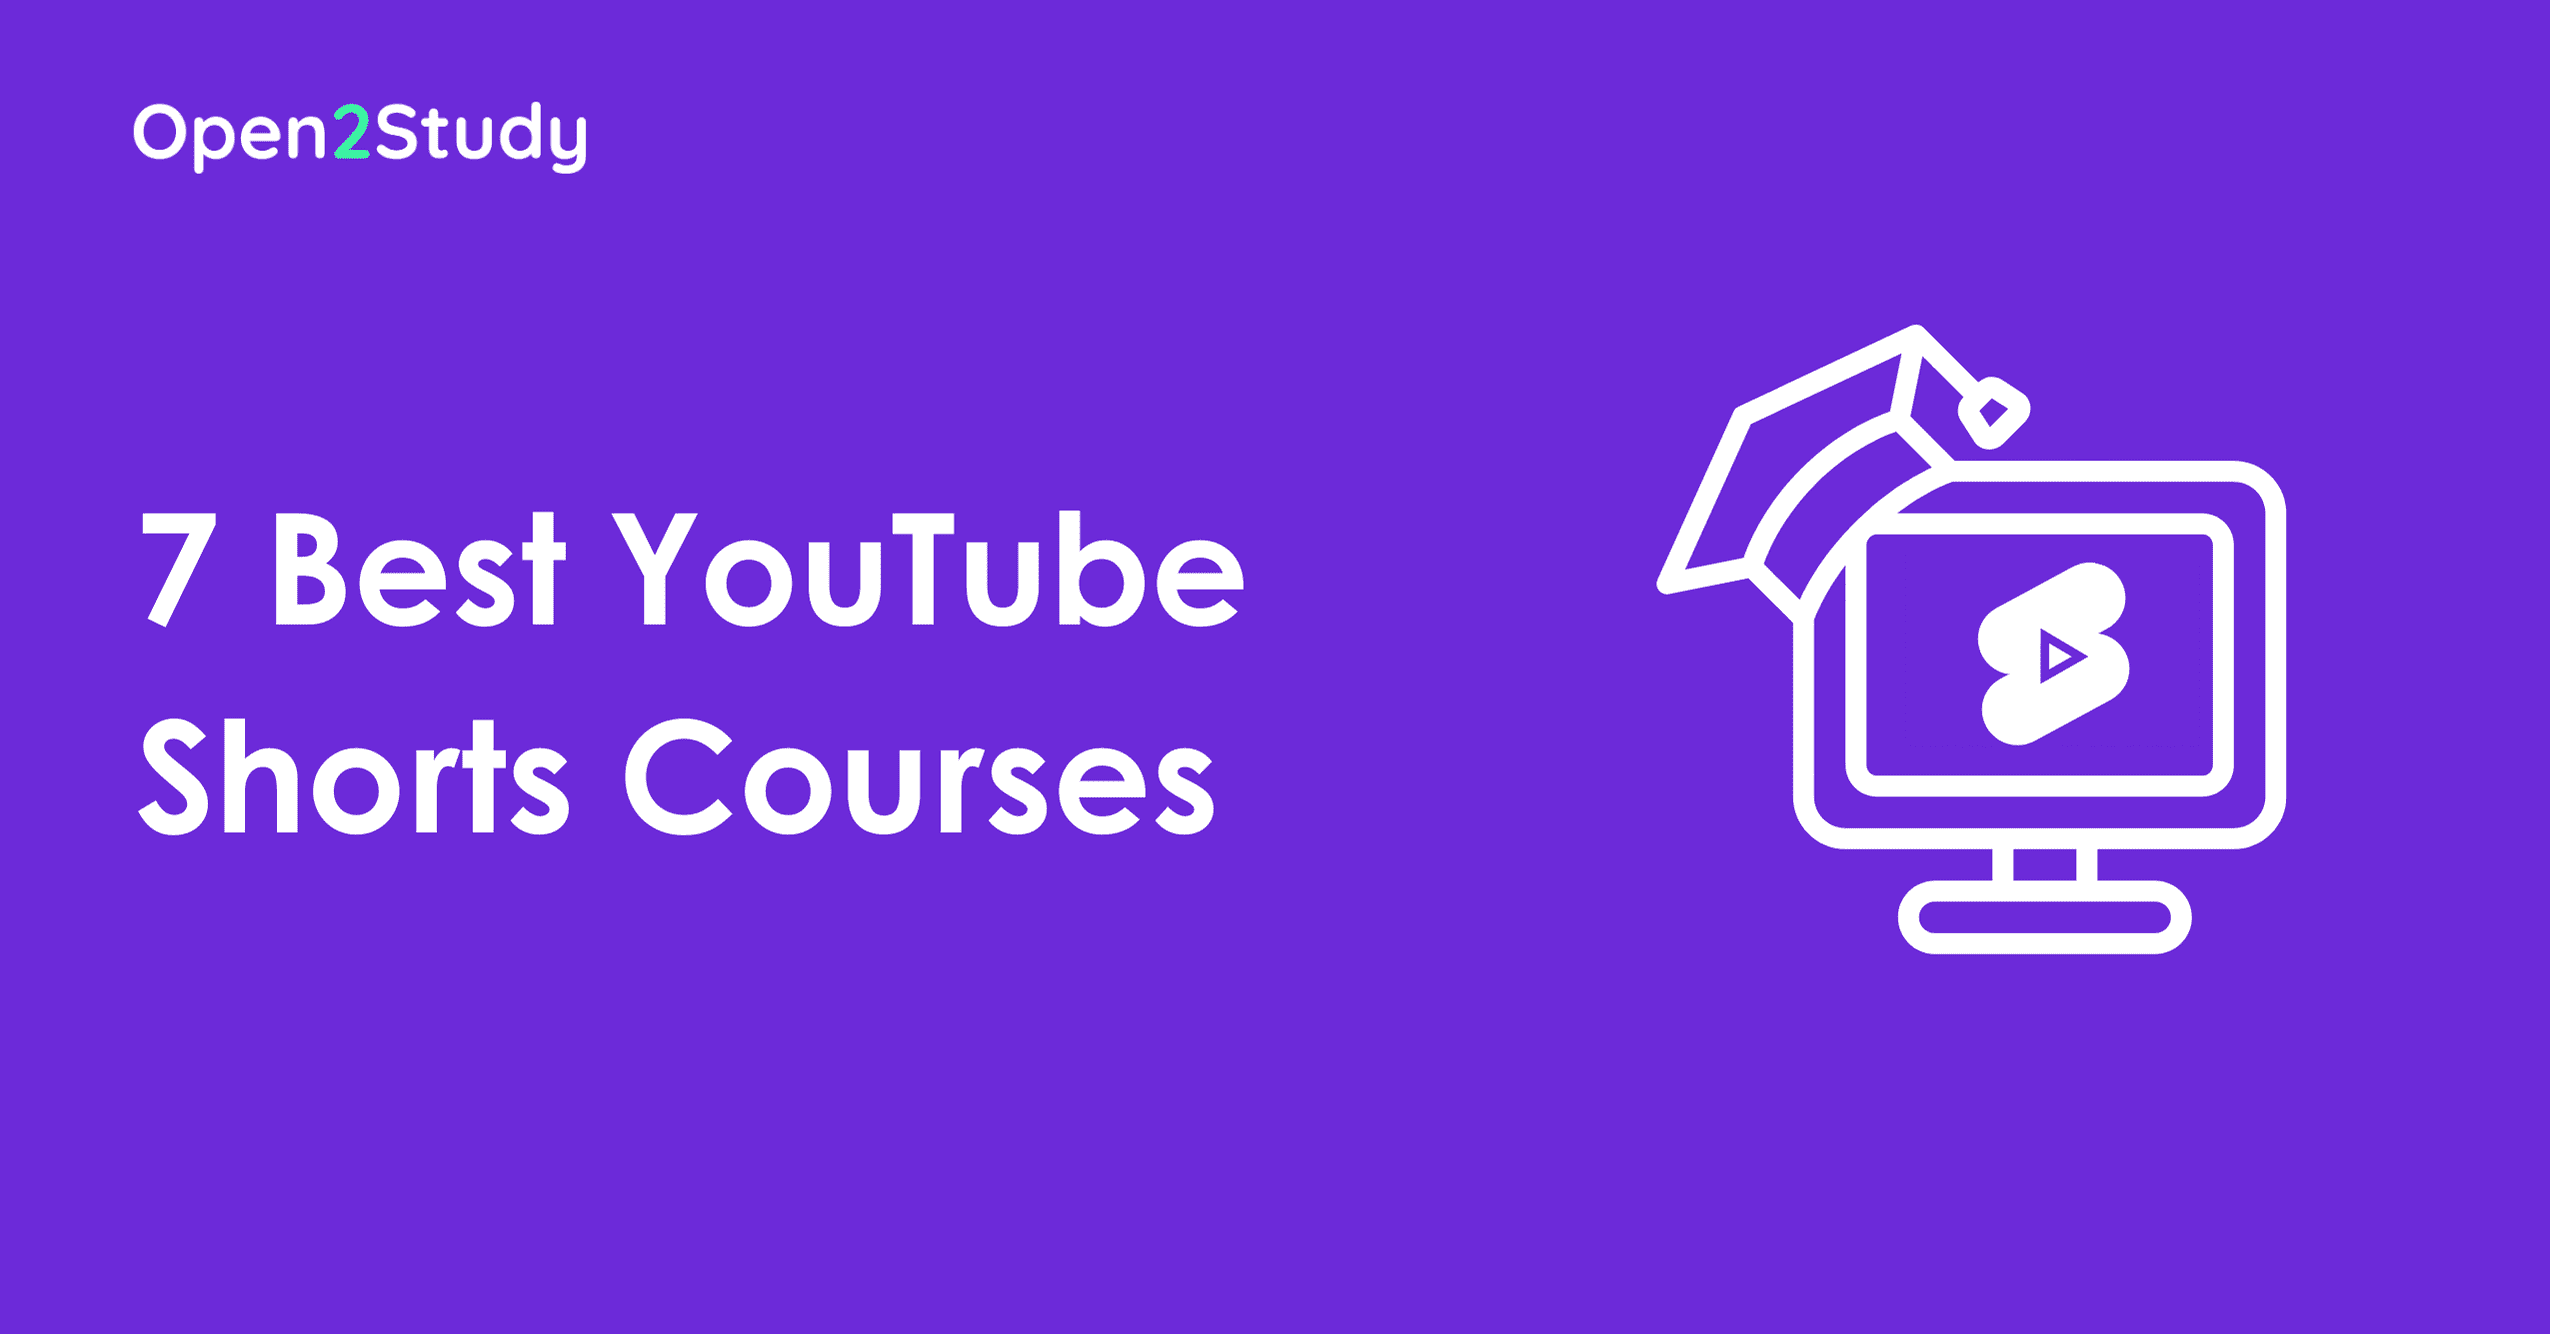 Youtube Shorts Course Featured Image